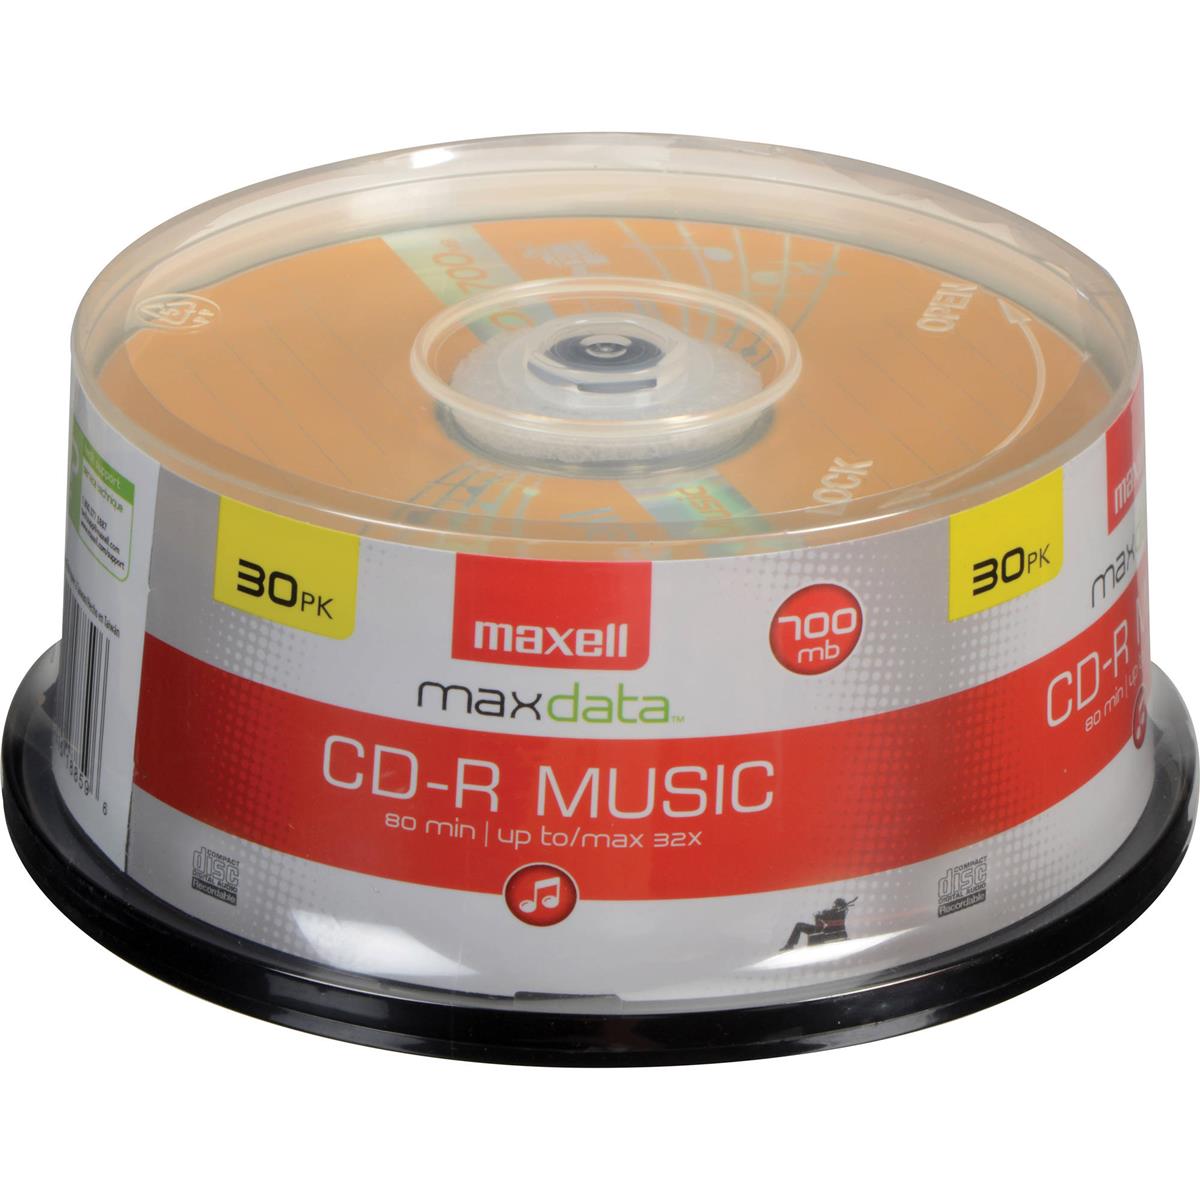 

Maxell Max Data CD-R 80 32x Music Gold for Audio Recording, Spindle Pack of 30